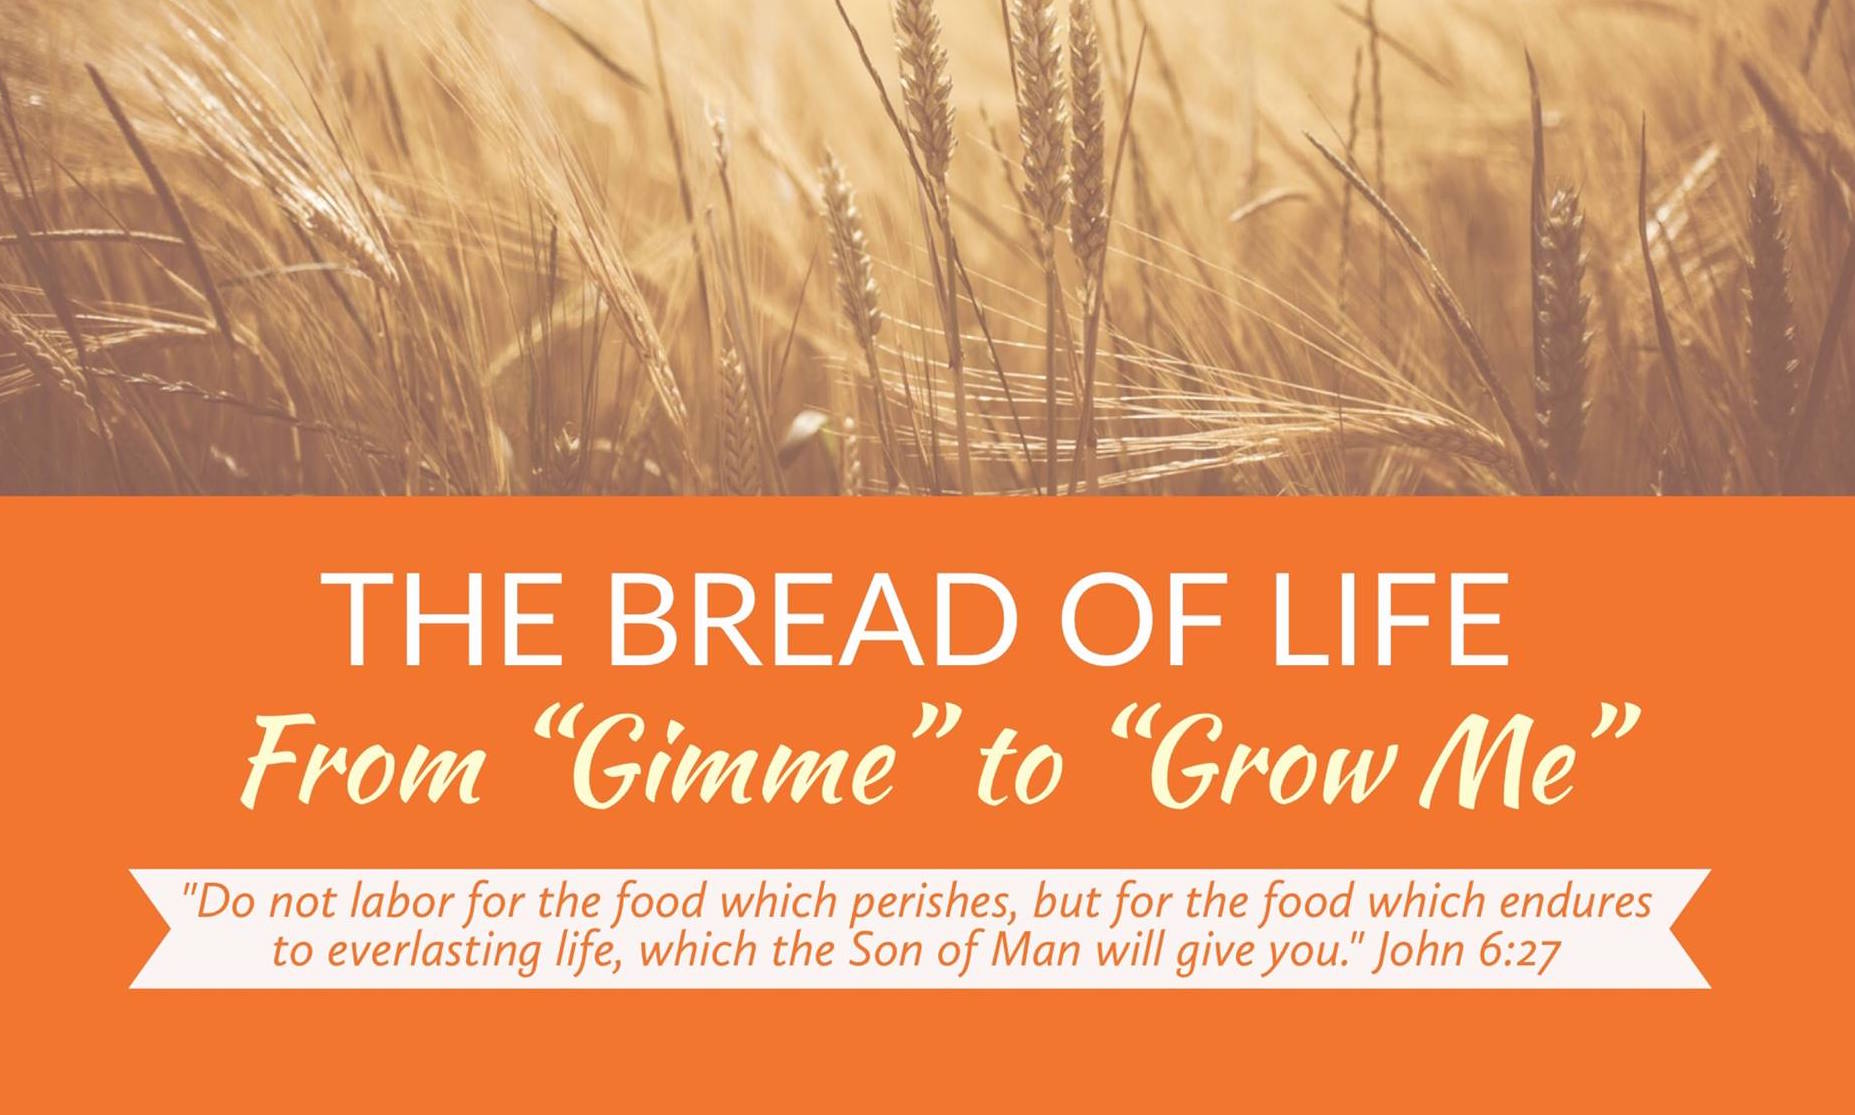 The Bread of Life: From "Gimme" to "Grow Me"